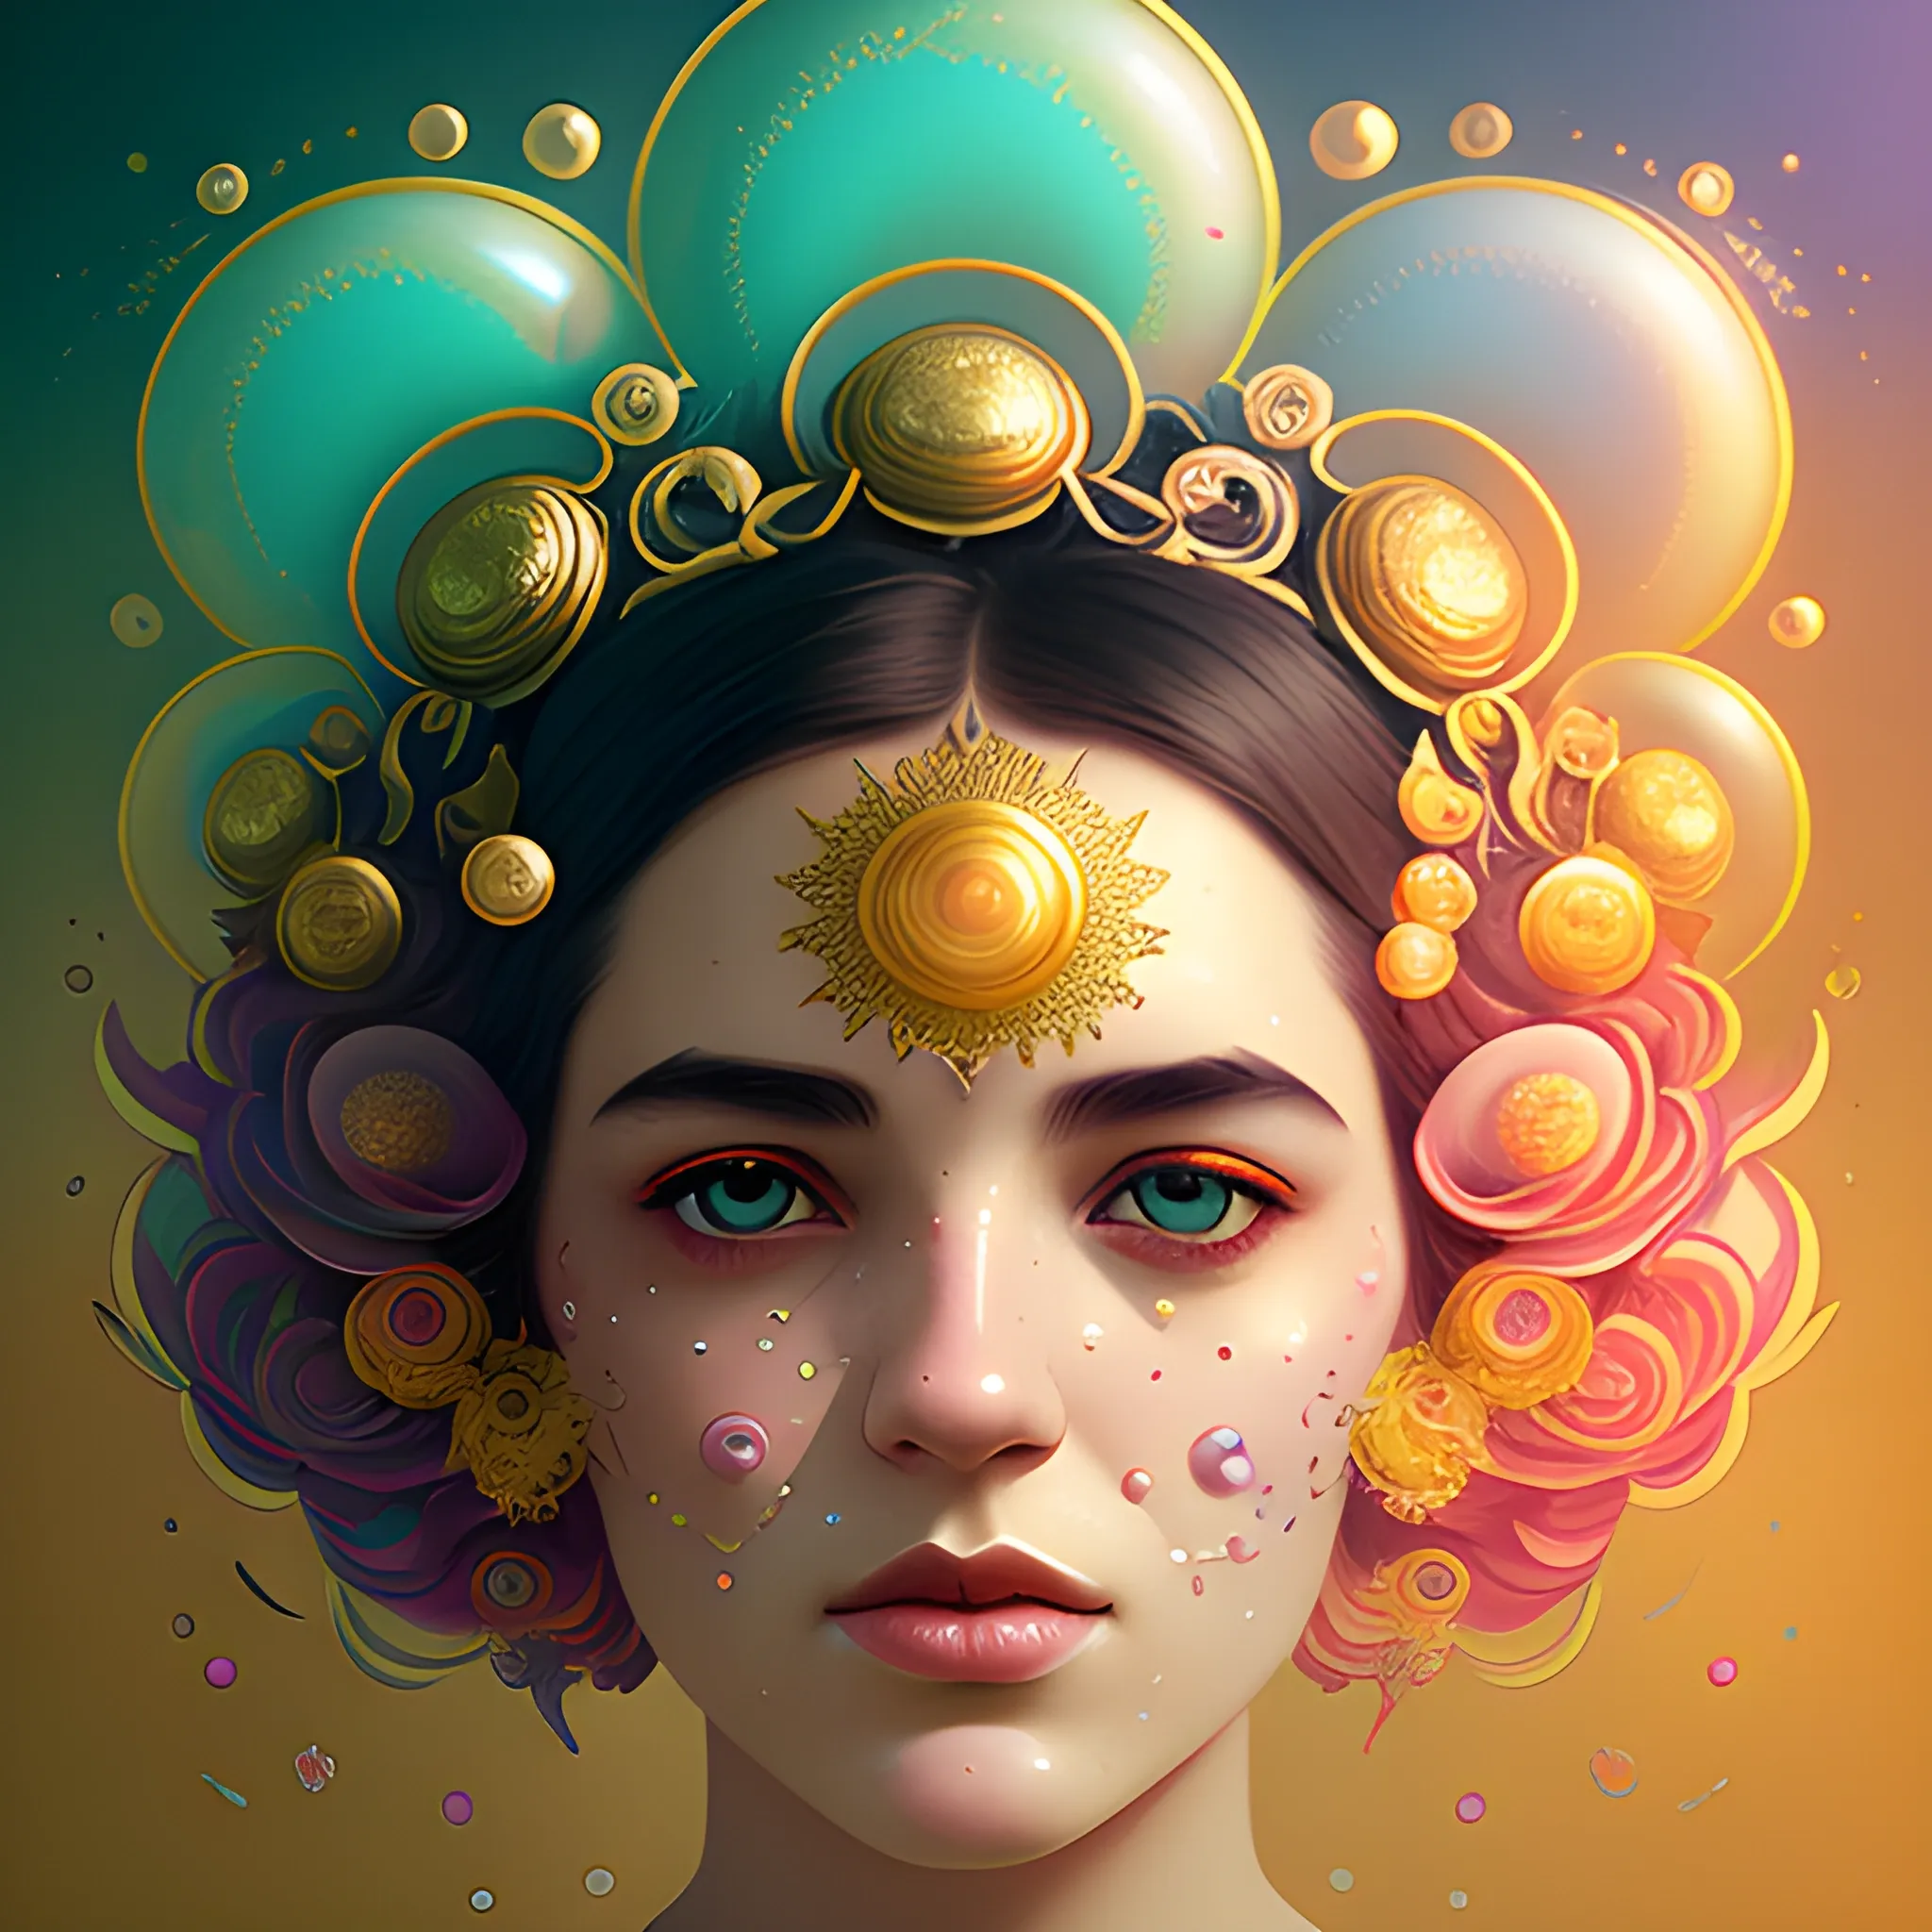 Flowery beautiful face with gold jewellery, by petros afshar, ross tran, Tom Bagshaw, tom whalen, underwater bubbly psychedelic clouds, Anaglyph 3D lens blur effect